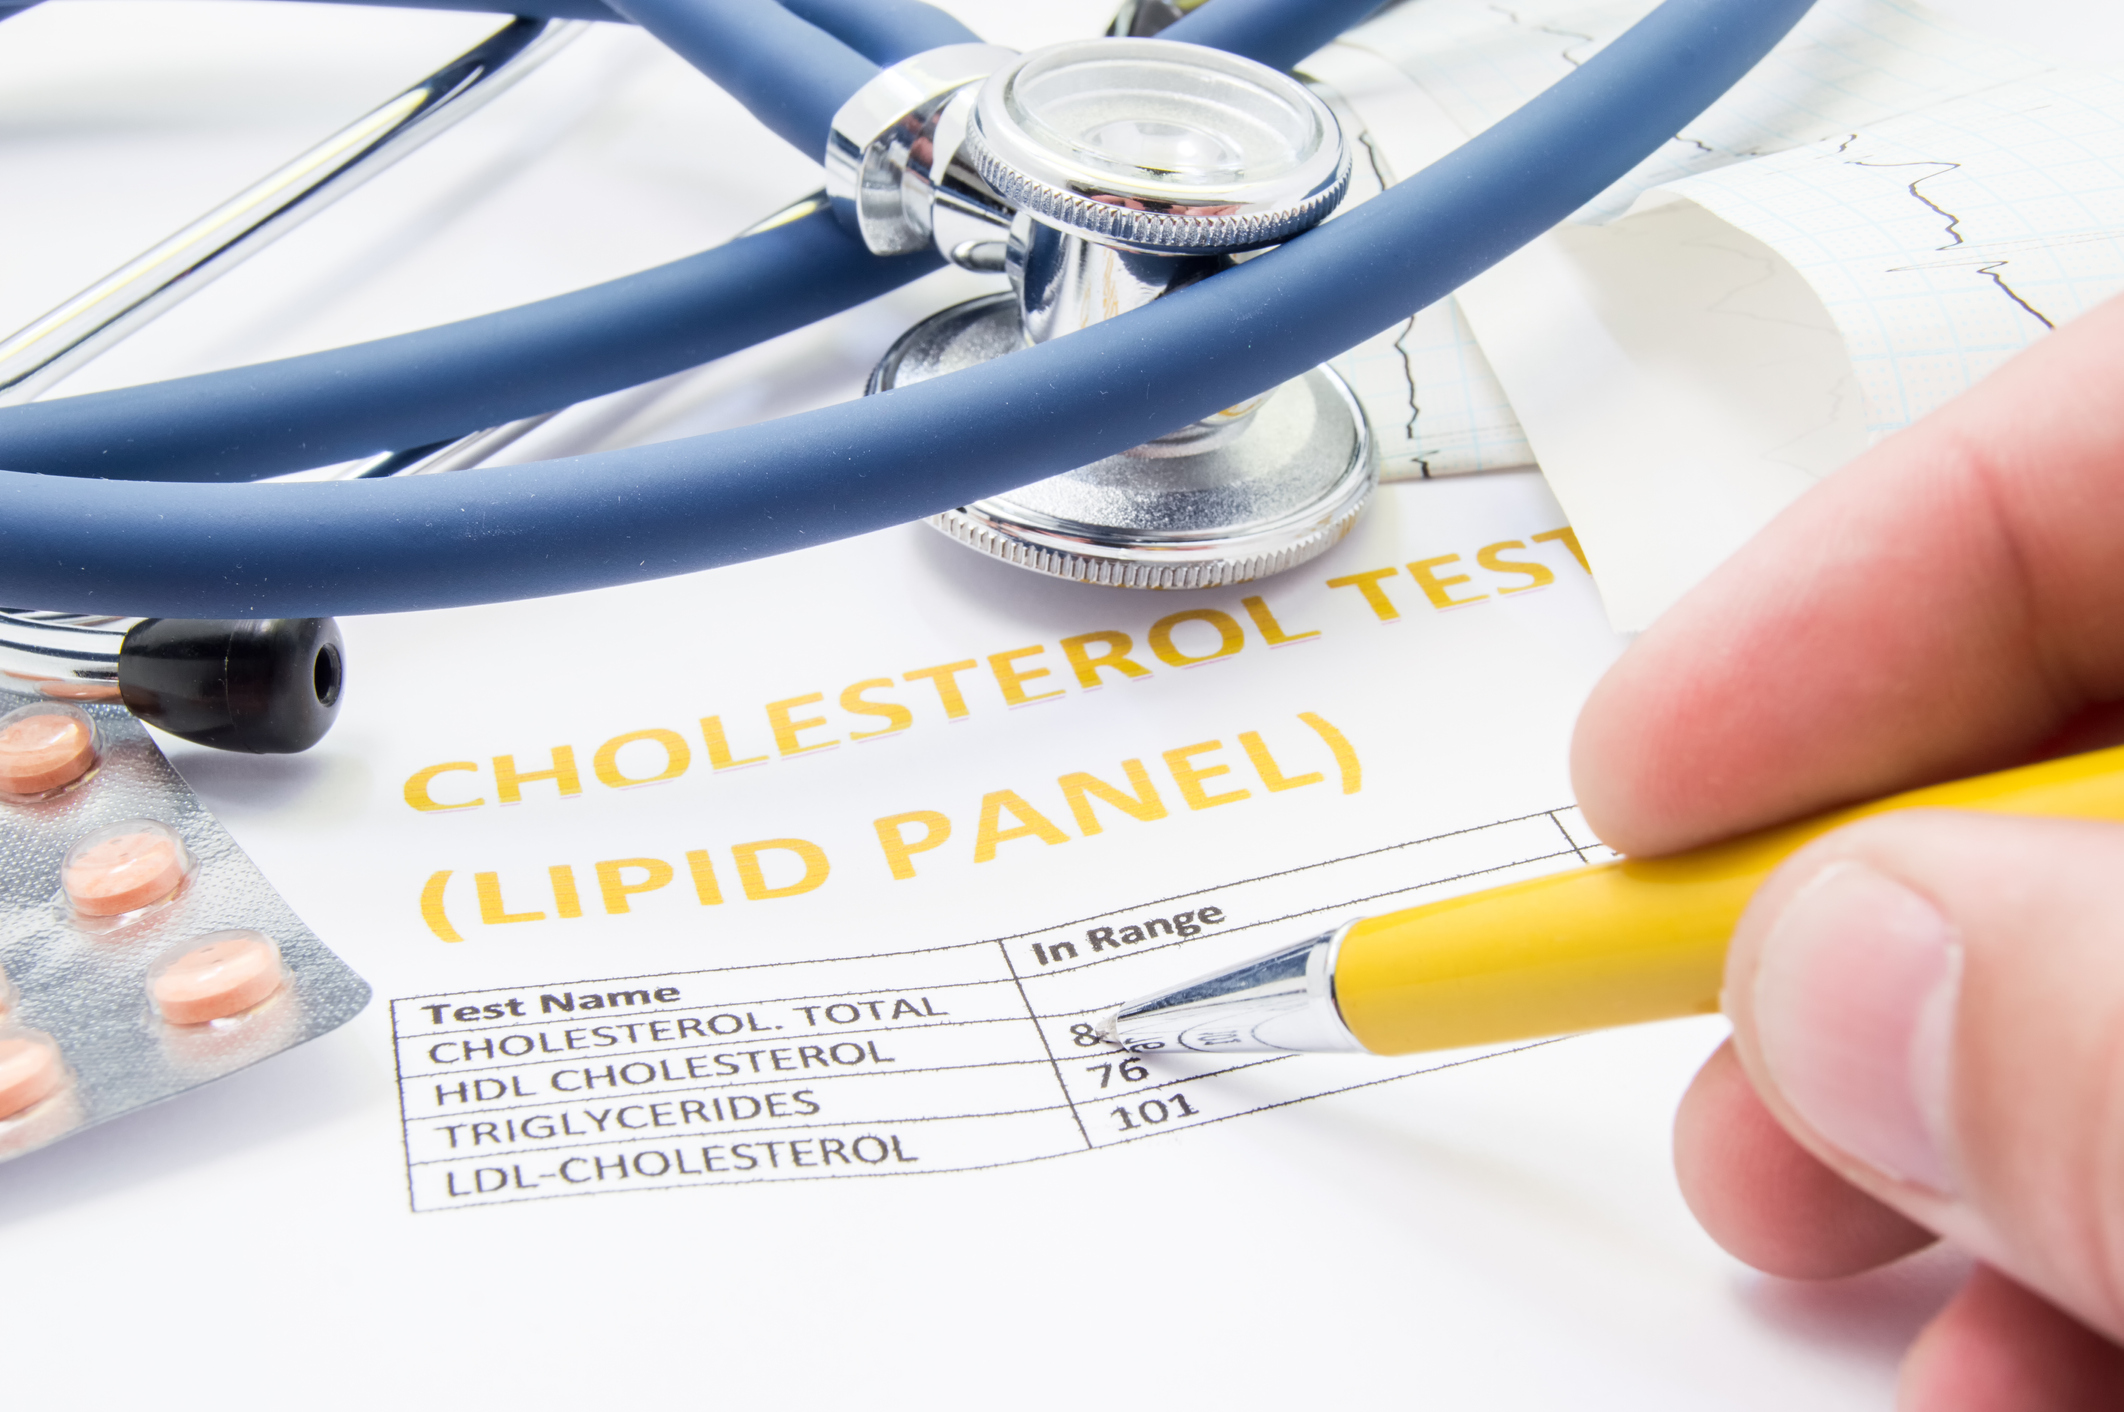 The Signs, Symptoms, and How To Manage Hyperlipidemia and Vascular Disease